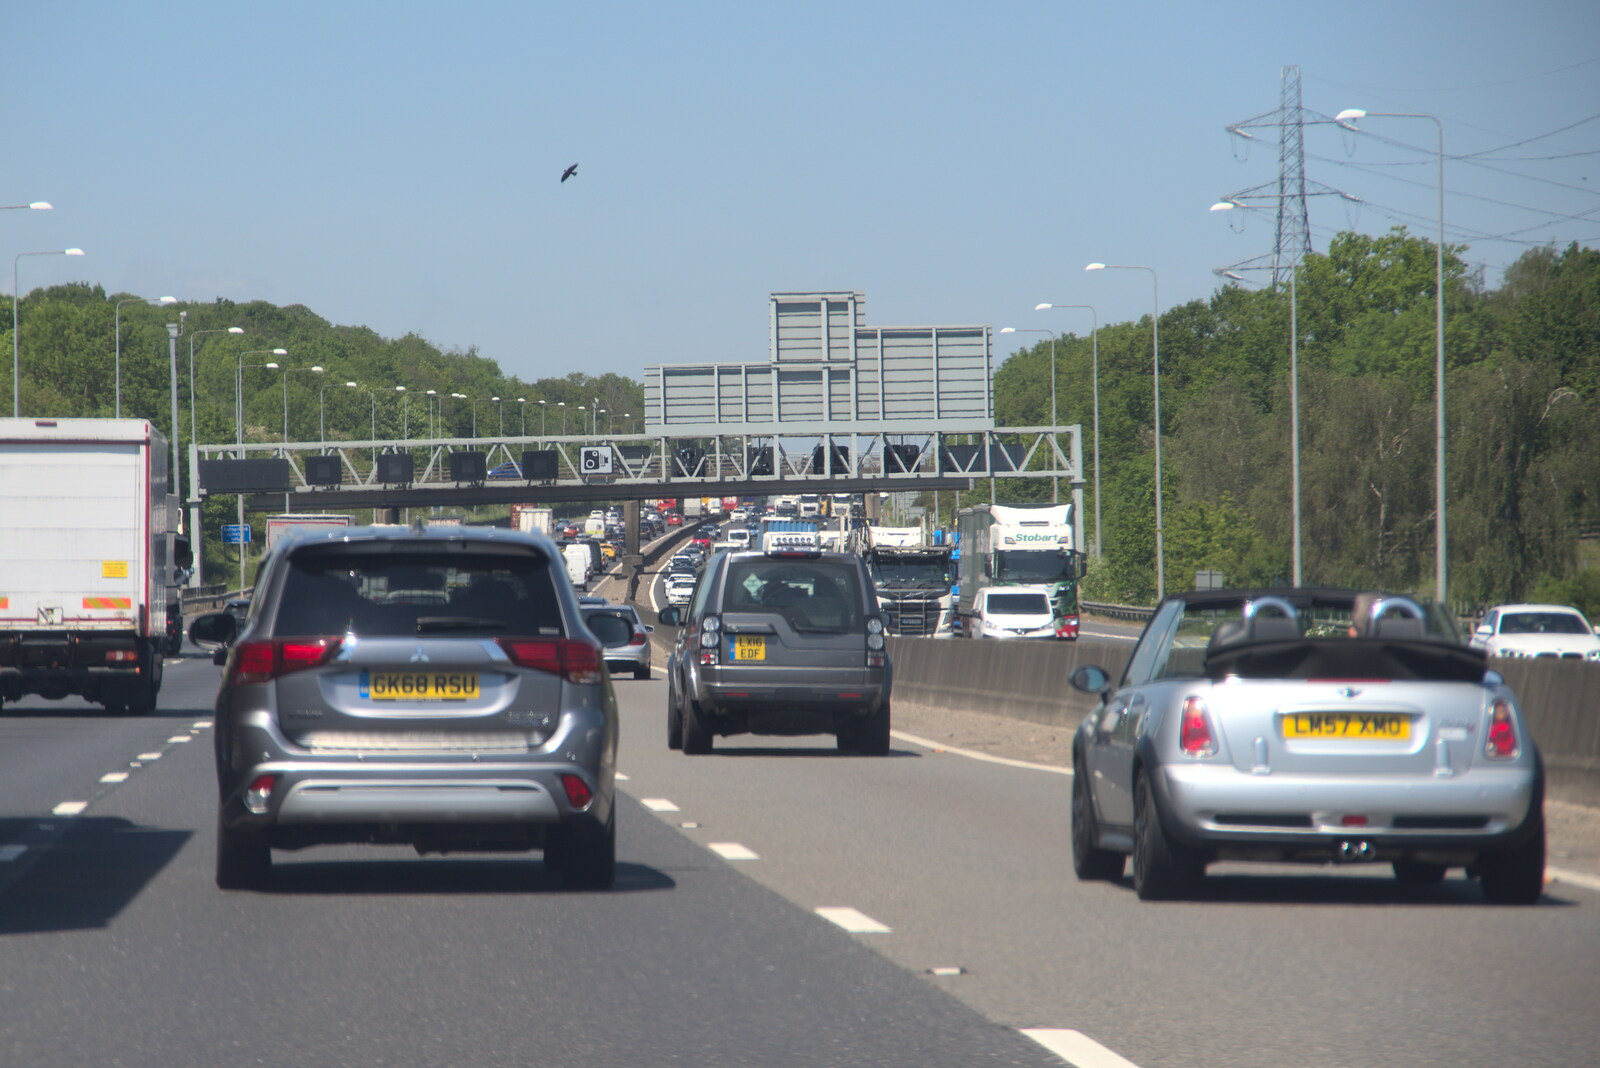 There's plenty of traffic on the M25 from A Trip to Grandma J's, Spreyton, Devon - 2nd June 2021